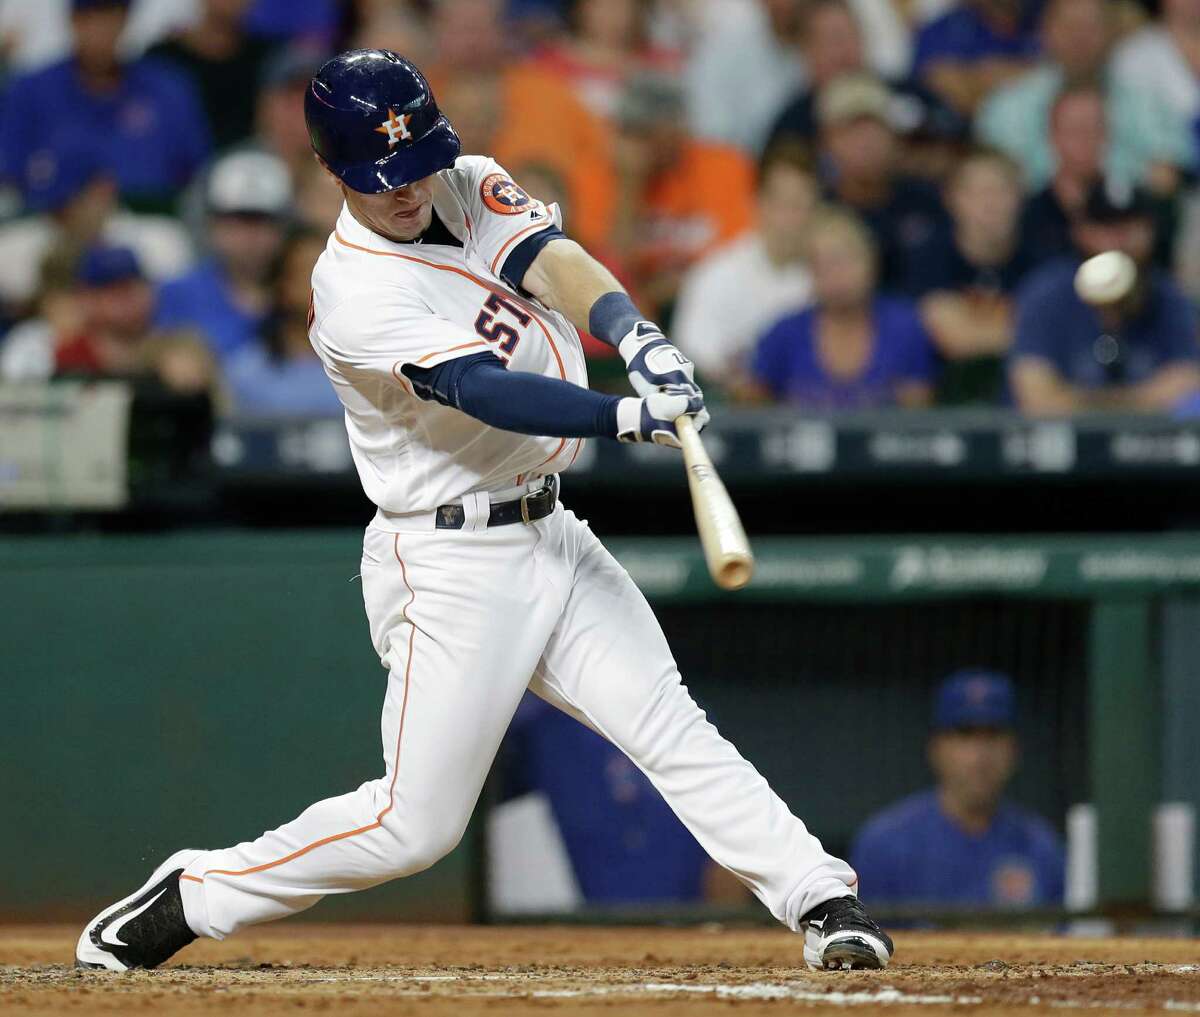 Houston Astros Alex Bregman hits a home run against Chicago Cubs during the third inning at Minute Maid Park Saturday, Sept. 10, 2016, in Houston. ( Melissa Phillip / Houston Chronicle )